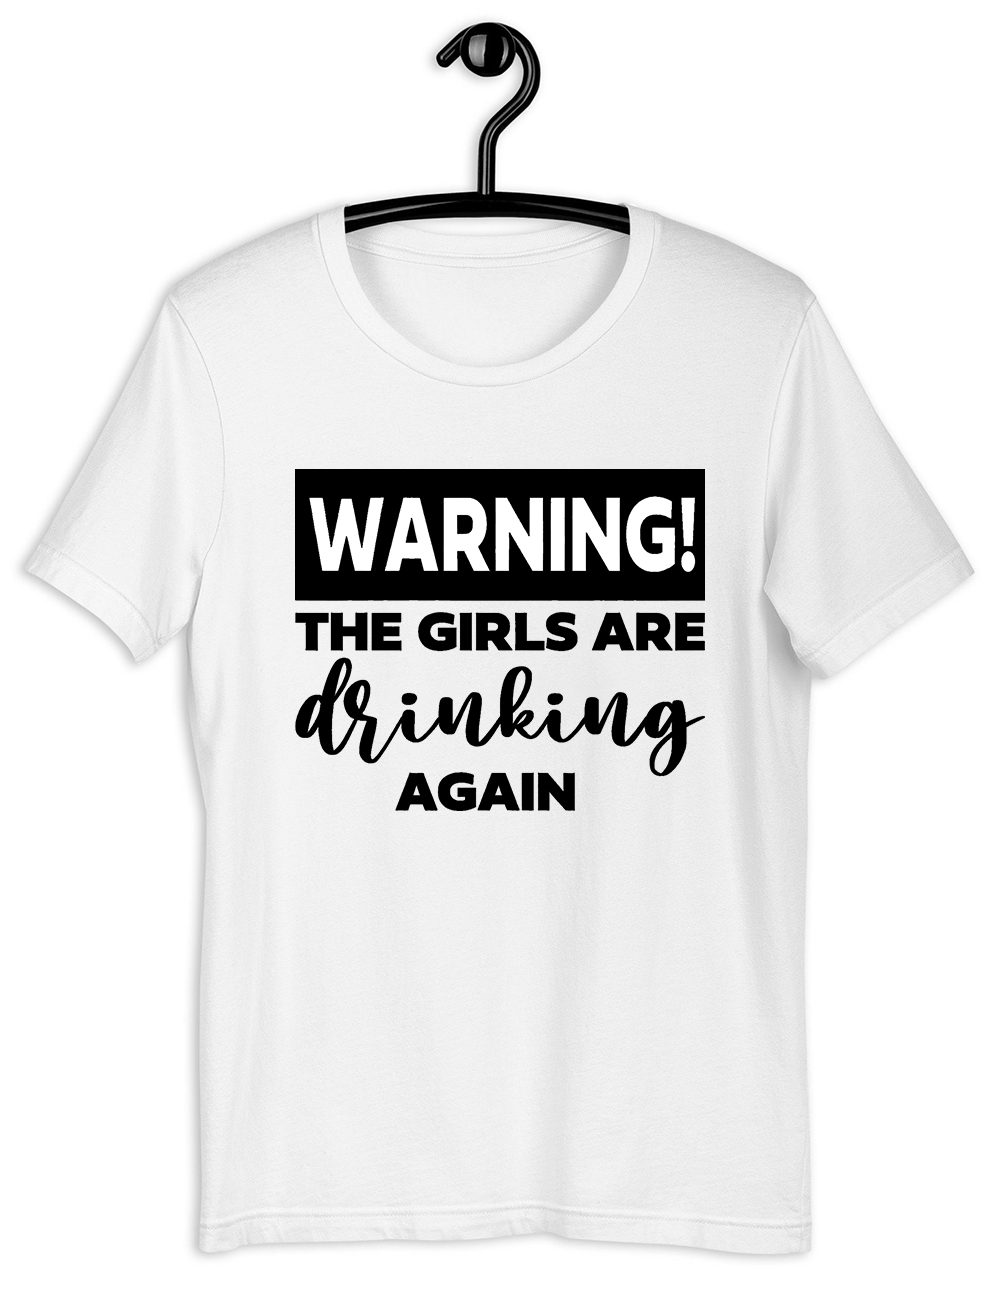 Warning! The Girls are Drinking Again T-Shirt